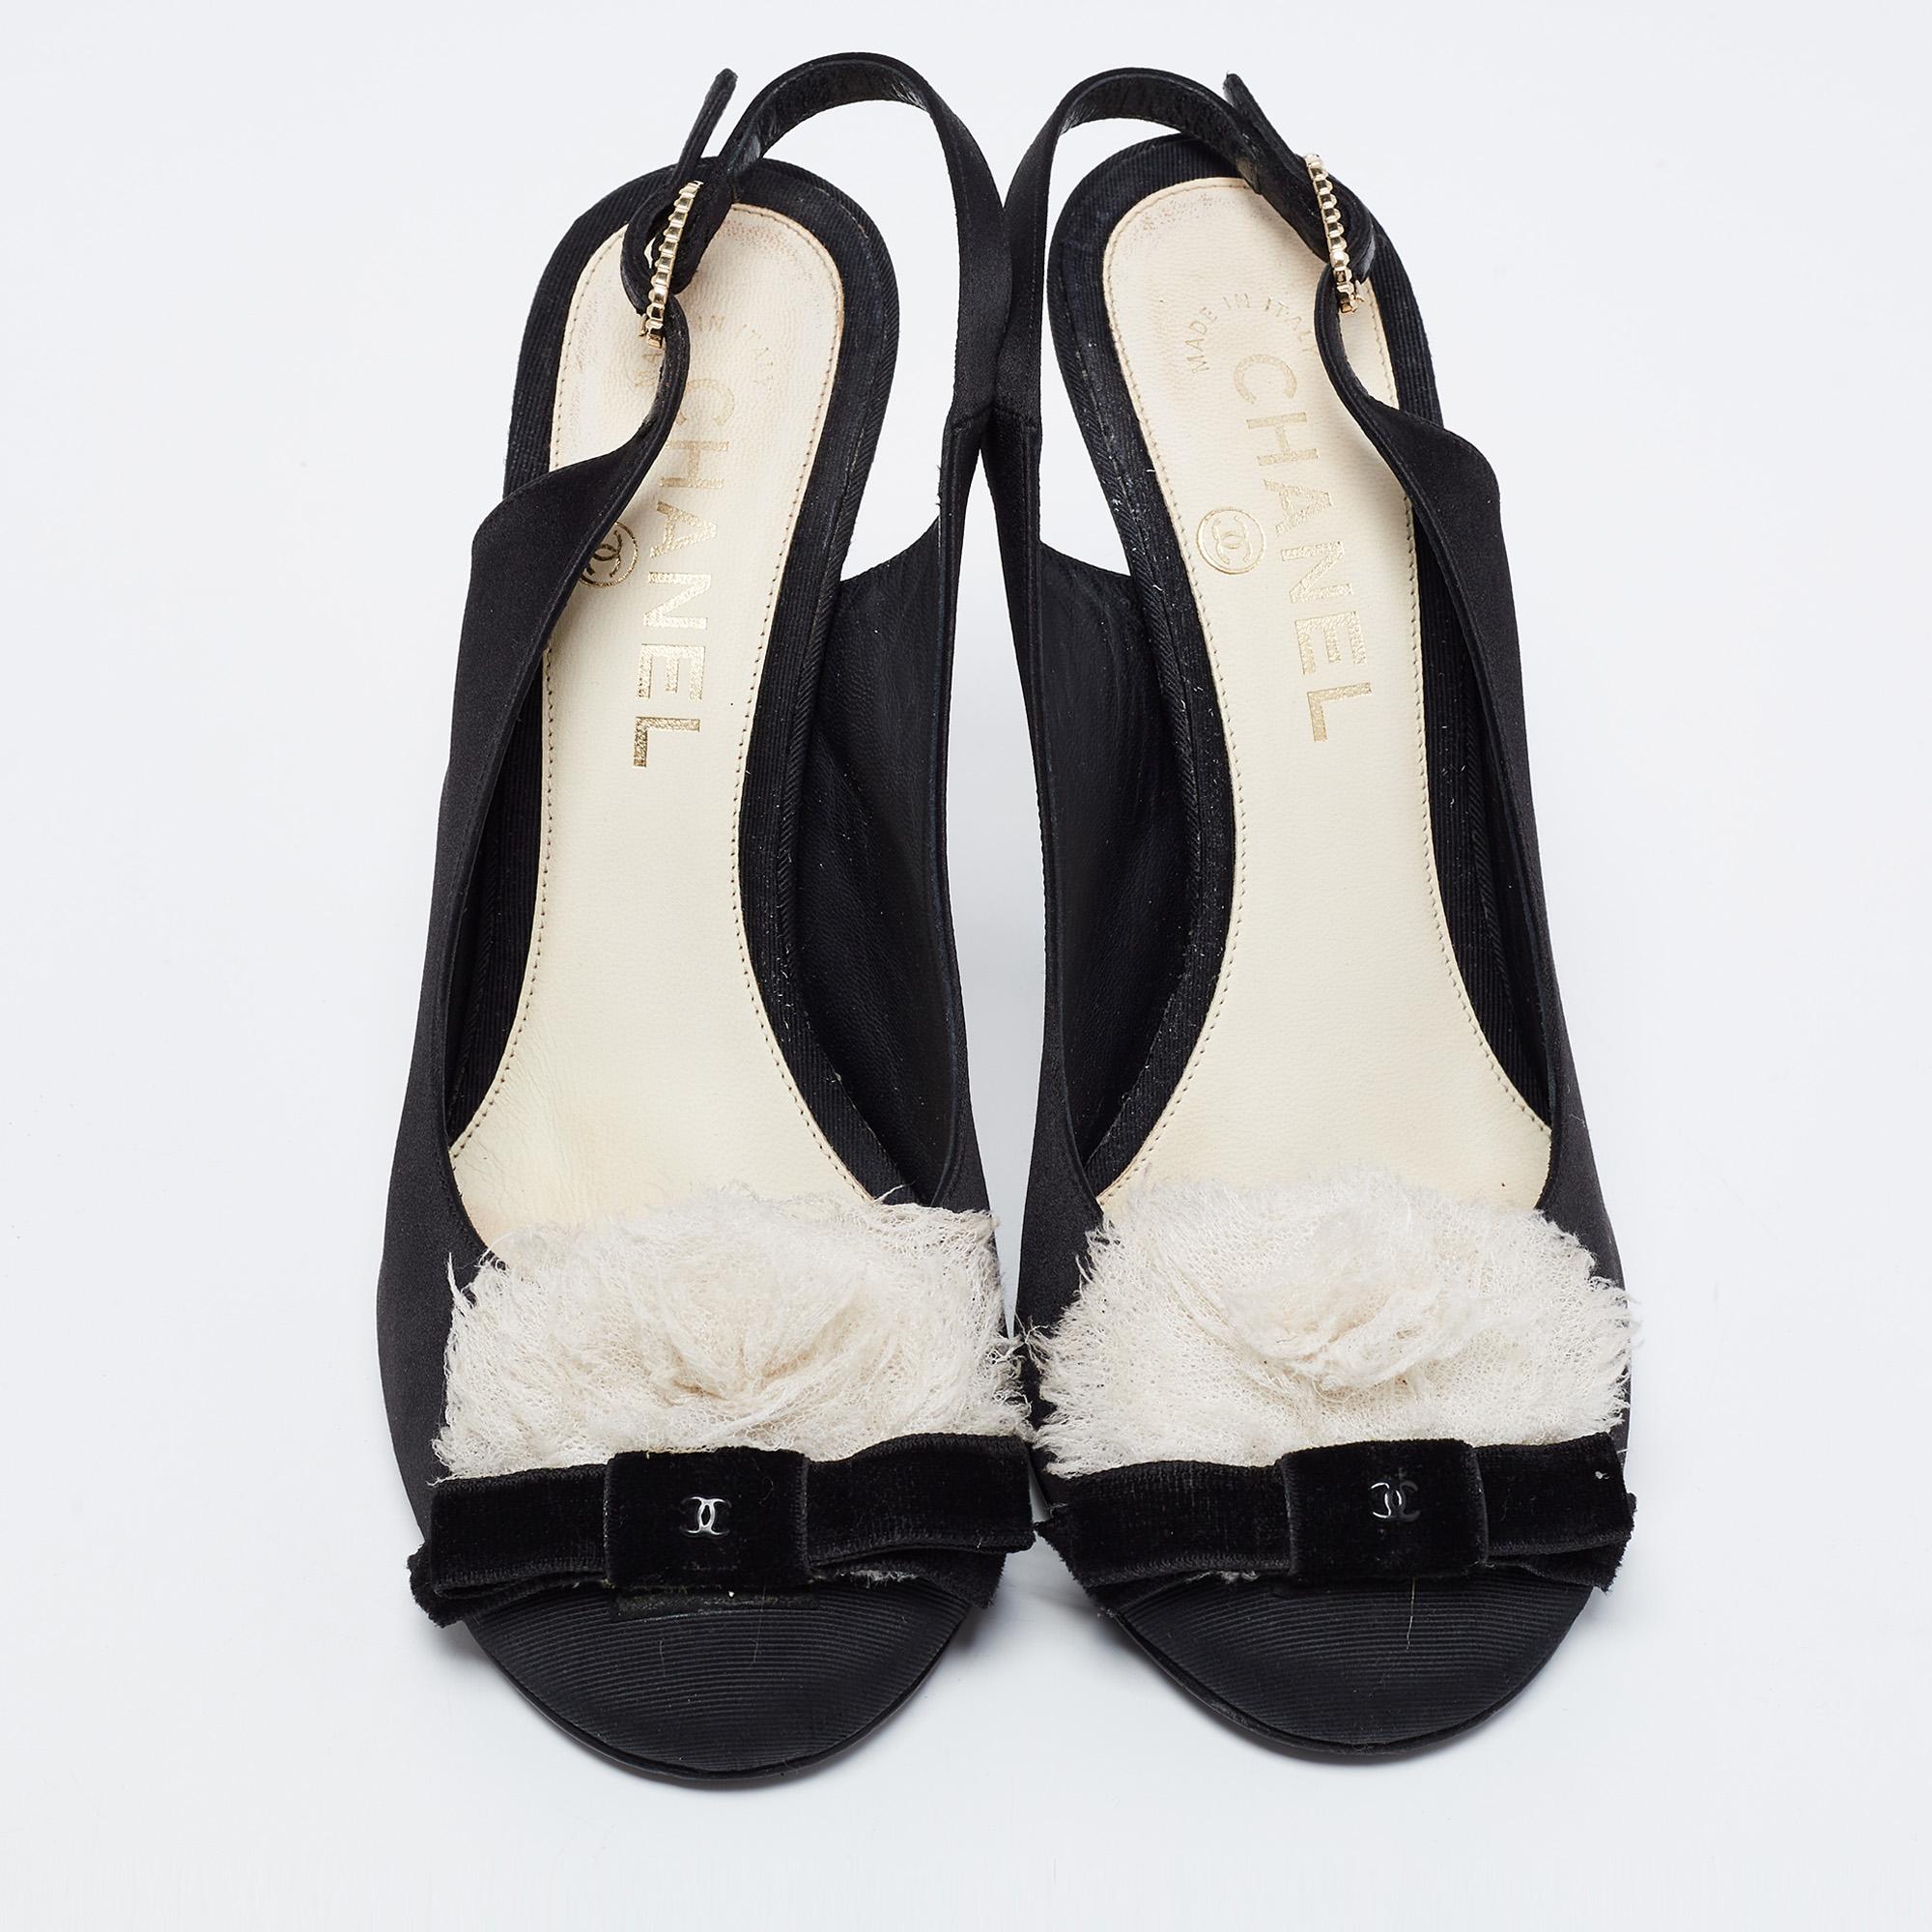 The white detailing on the vamps against the black exterior offer this pair of Chanel pumps an elegant display. Crafted from satin and fabric, the branded bows on the front lead to instant brand identification, and it is uplifted on 10.5cm